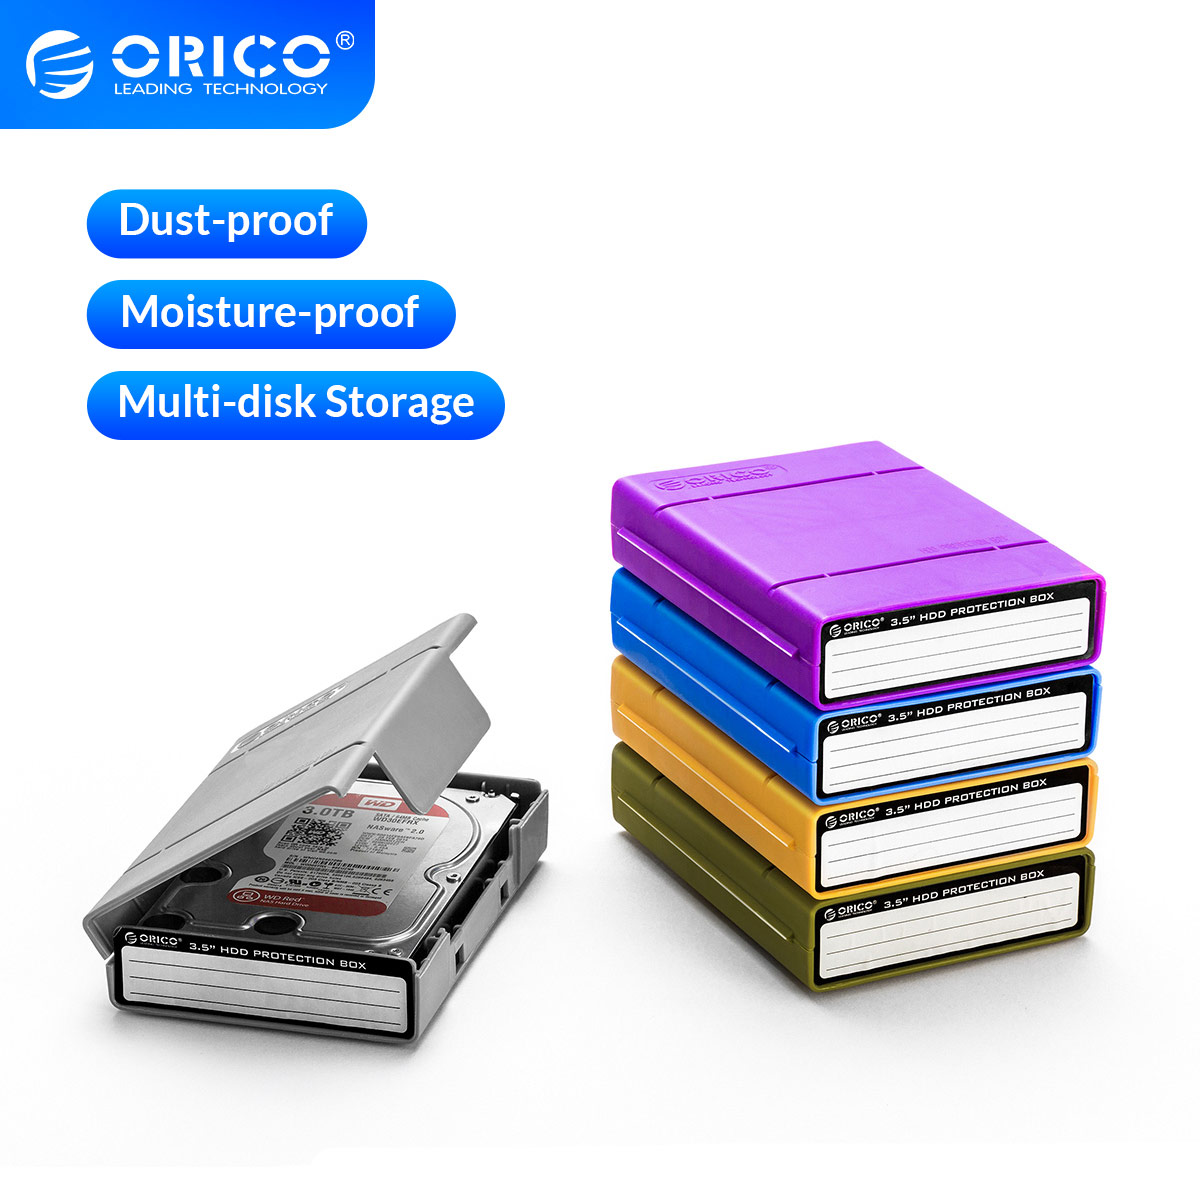 ORICO 3.5'' HDD Protector Anti-Static Hard Drive Protective Enclosure Case Cover 